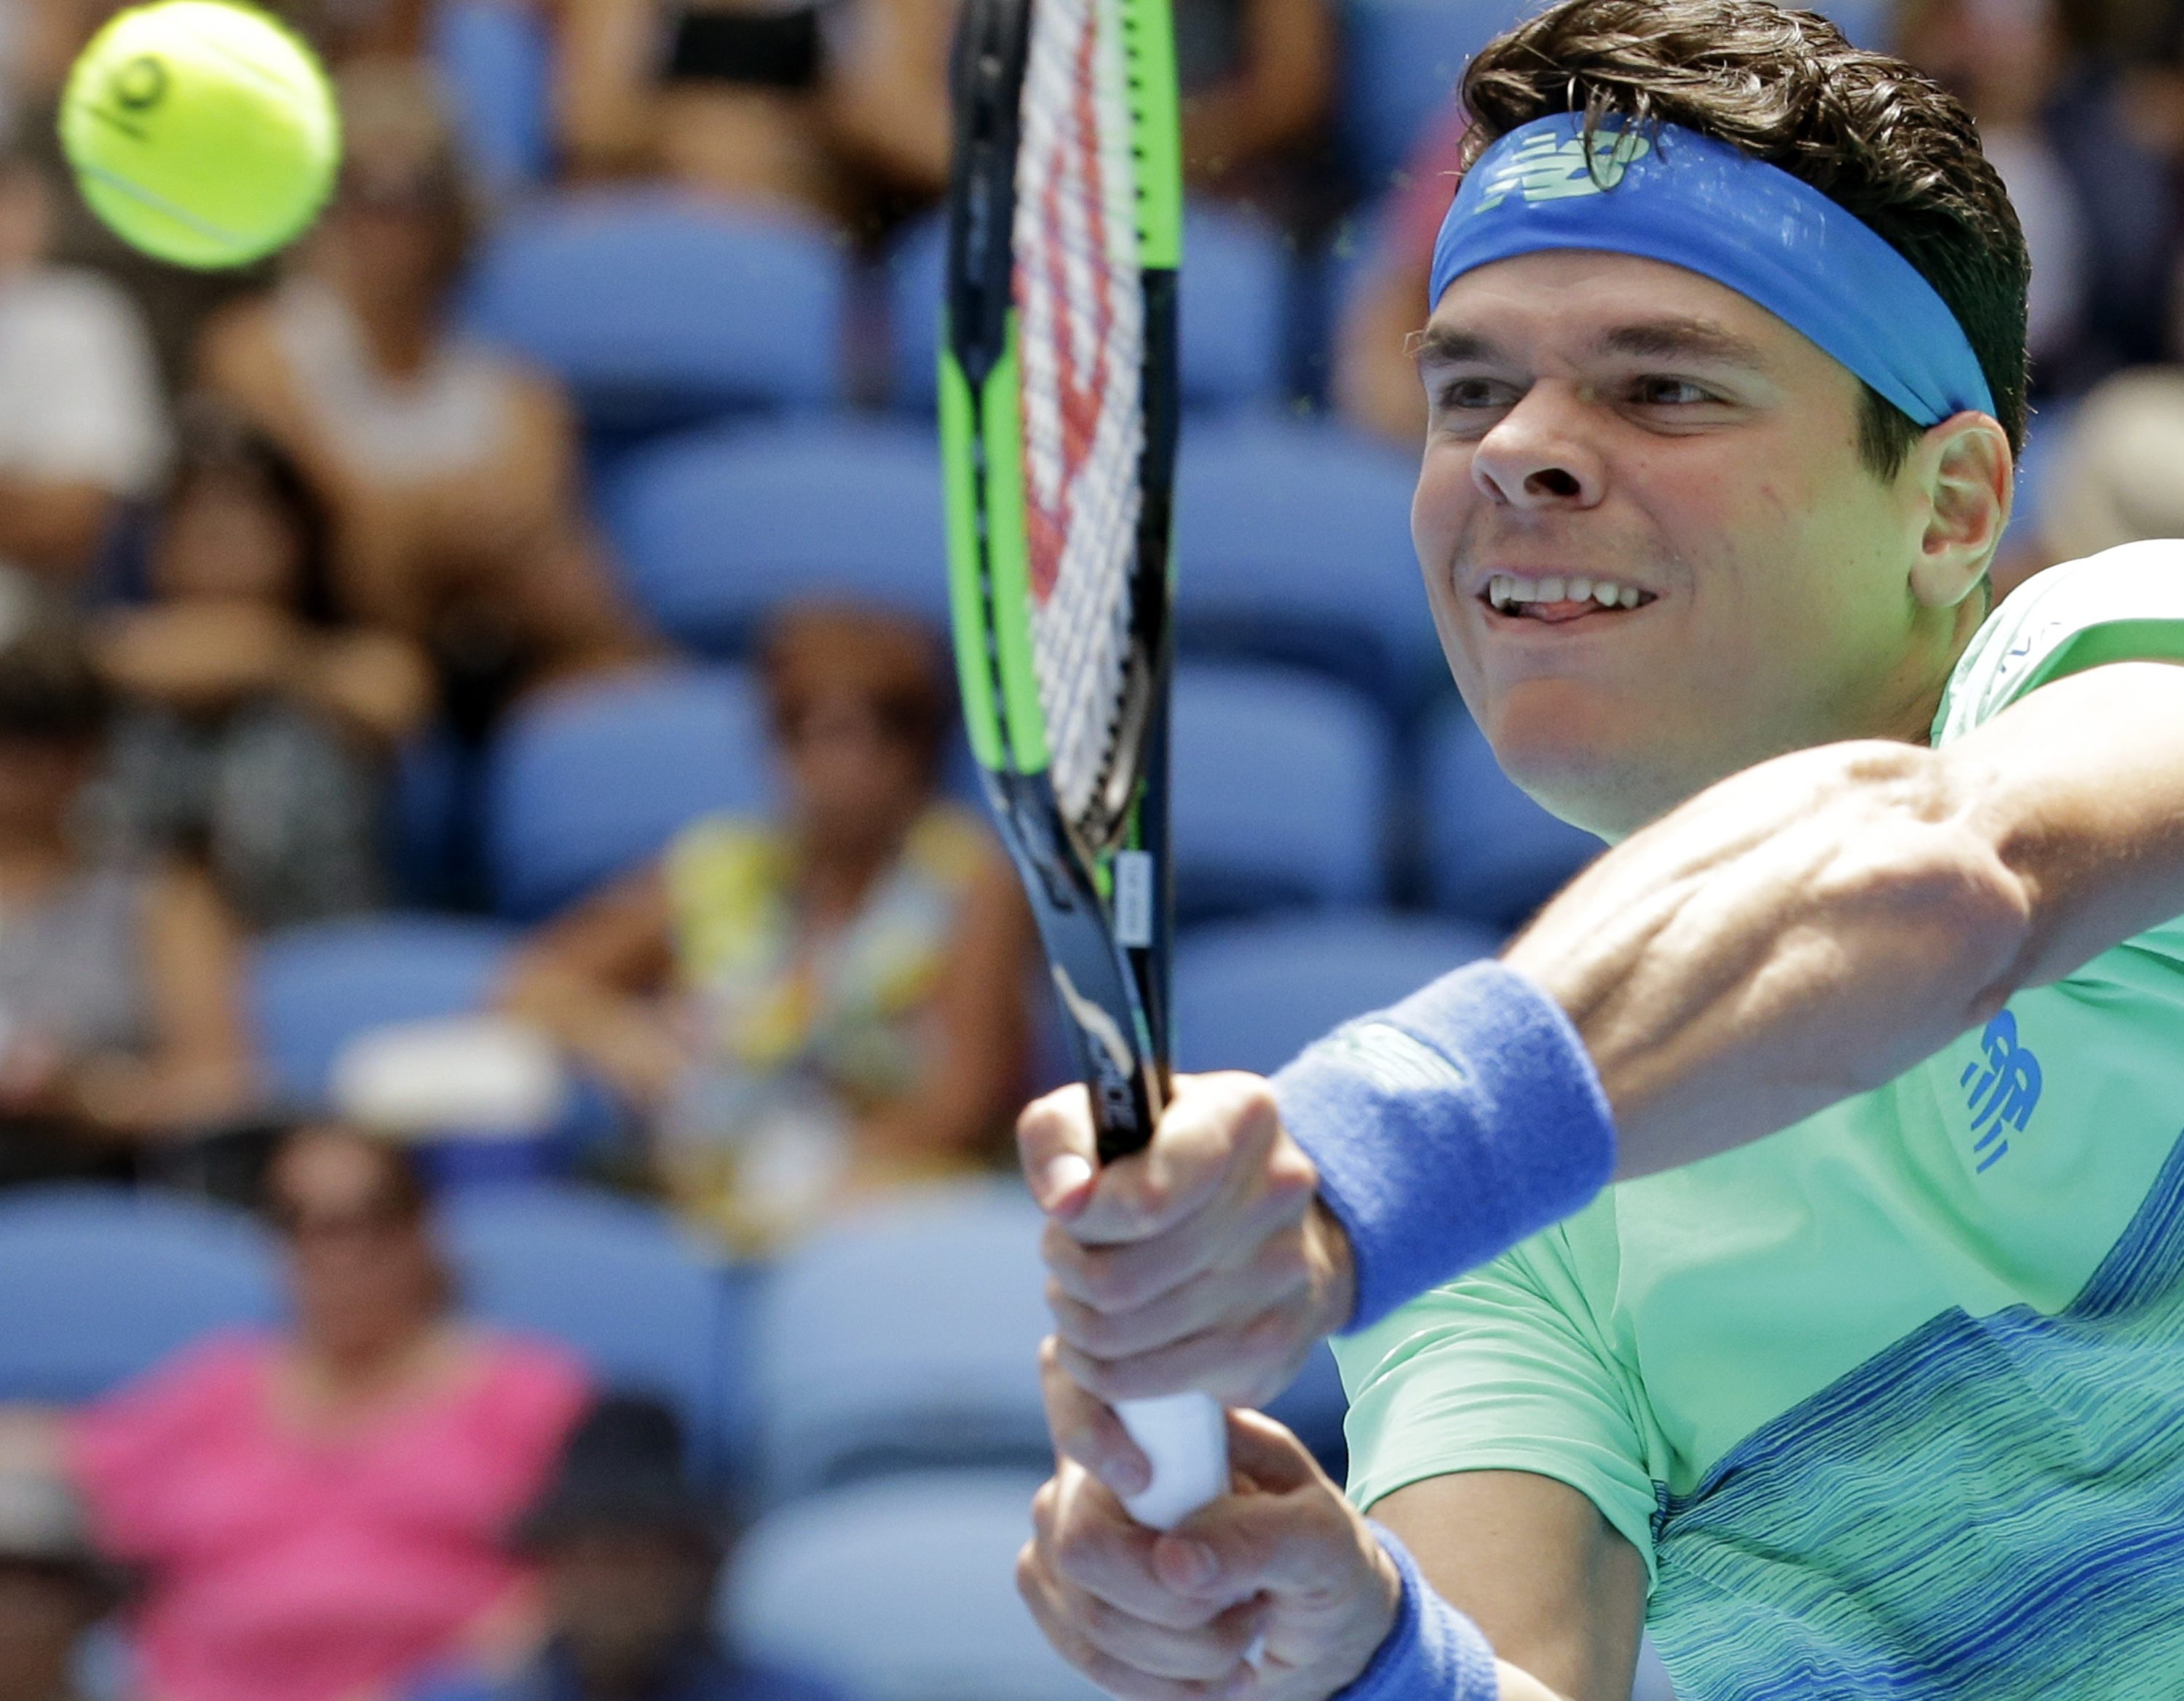 Canada's Milos Raonic makes a backhand return to Germany's Dustin Brown during their first round match at the Australian Open tennis championships in Melbourne, Australia, Tuesday, Jan. 17, 2017. (AP Photo/Aaron Favila)